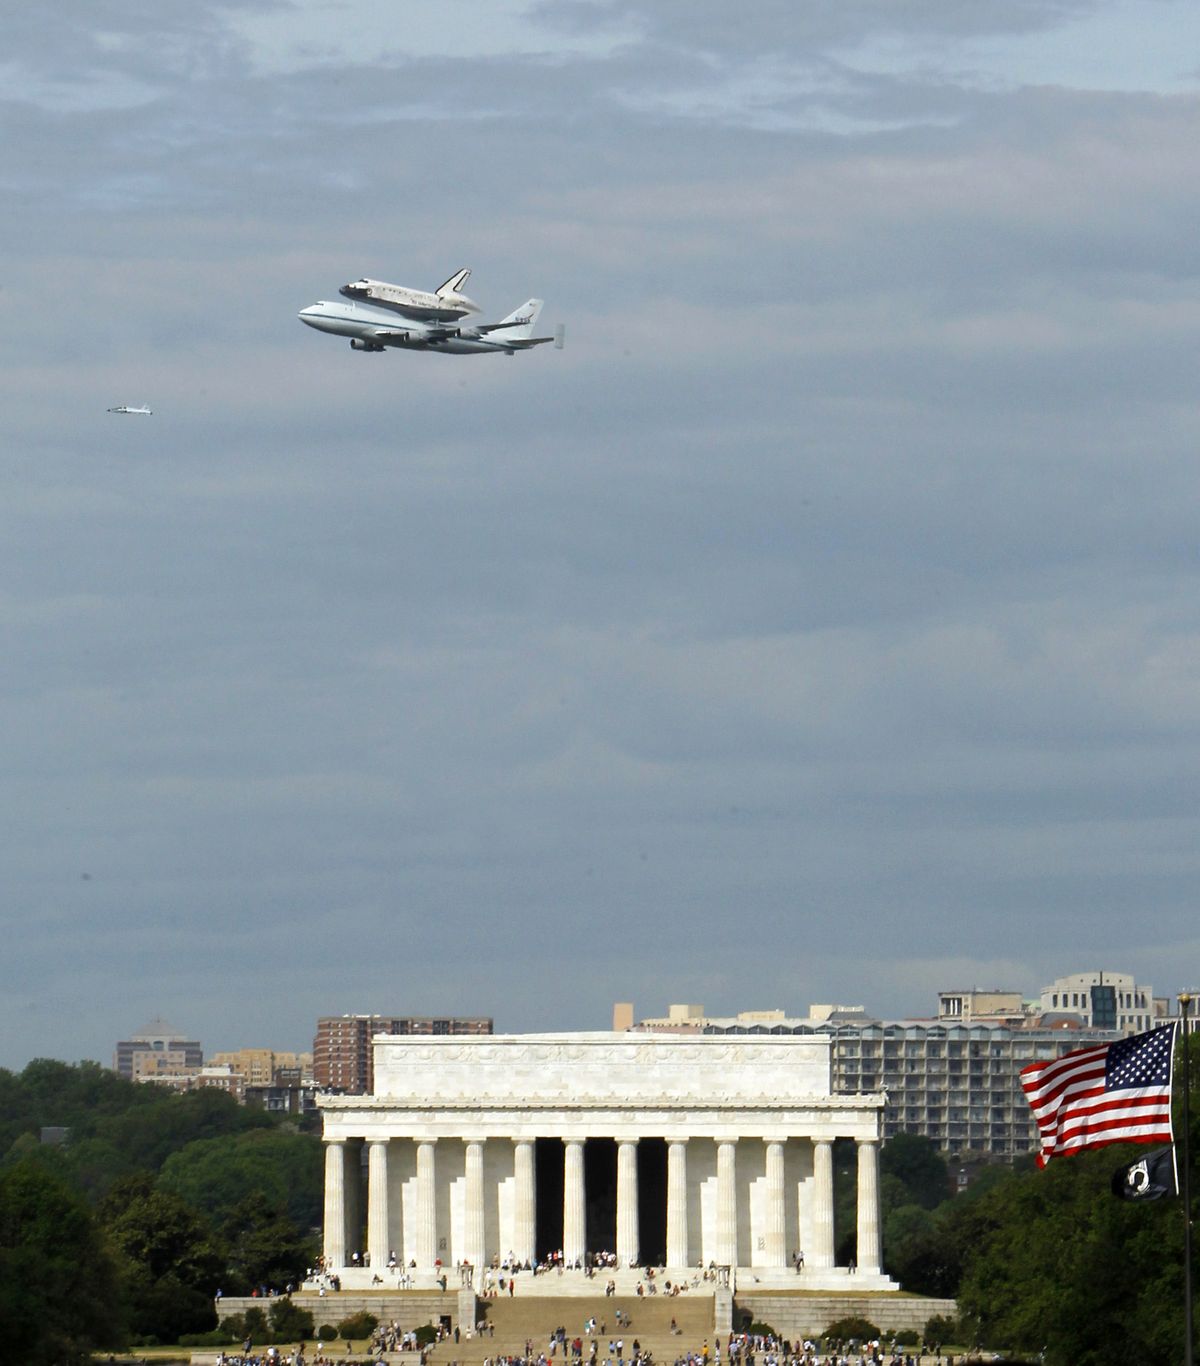 The Space Shuttle Discovery, mounted on the Shuttle Carrier Aircraft, flies over the Lincoln Memorial in Washington, Tuesday, April 17, 2012. Discovery is en route from Kennedy Space Center to the Smithsonian National Air and Space Museum Udvar/Hazy Center at Dulles International Airport. (Ann Heisenfelt / Fr13069 Ap)